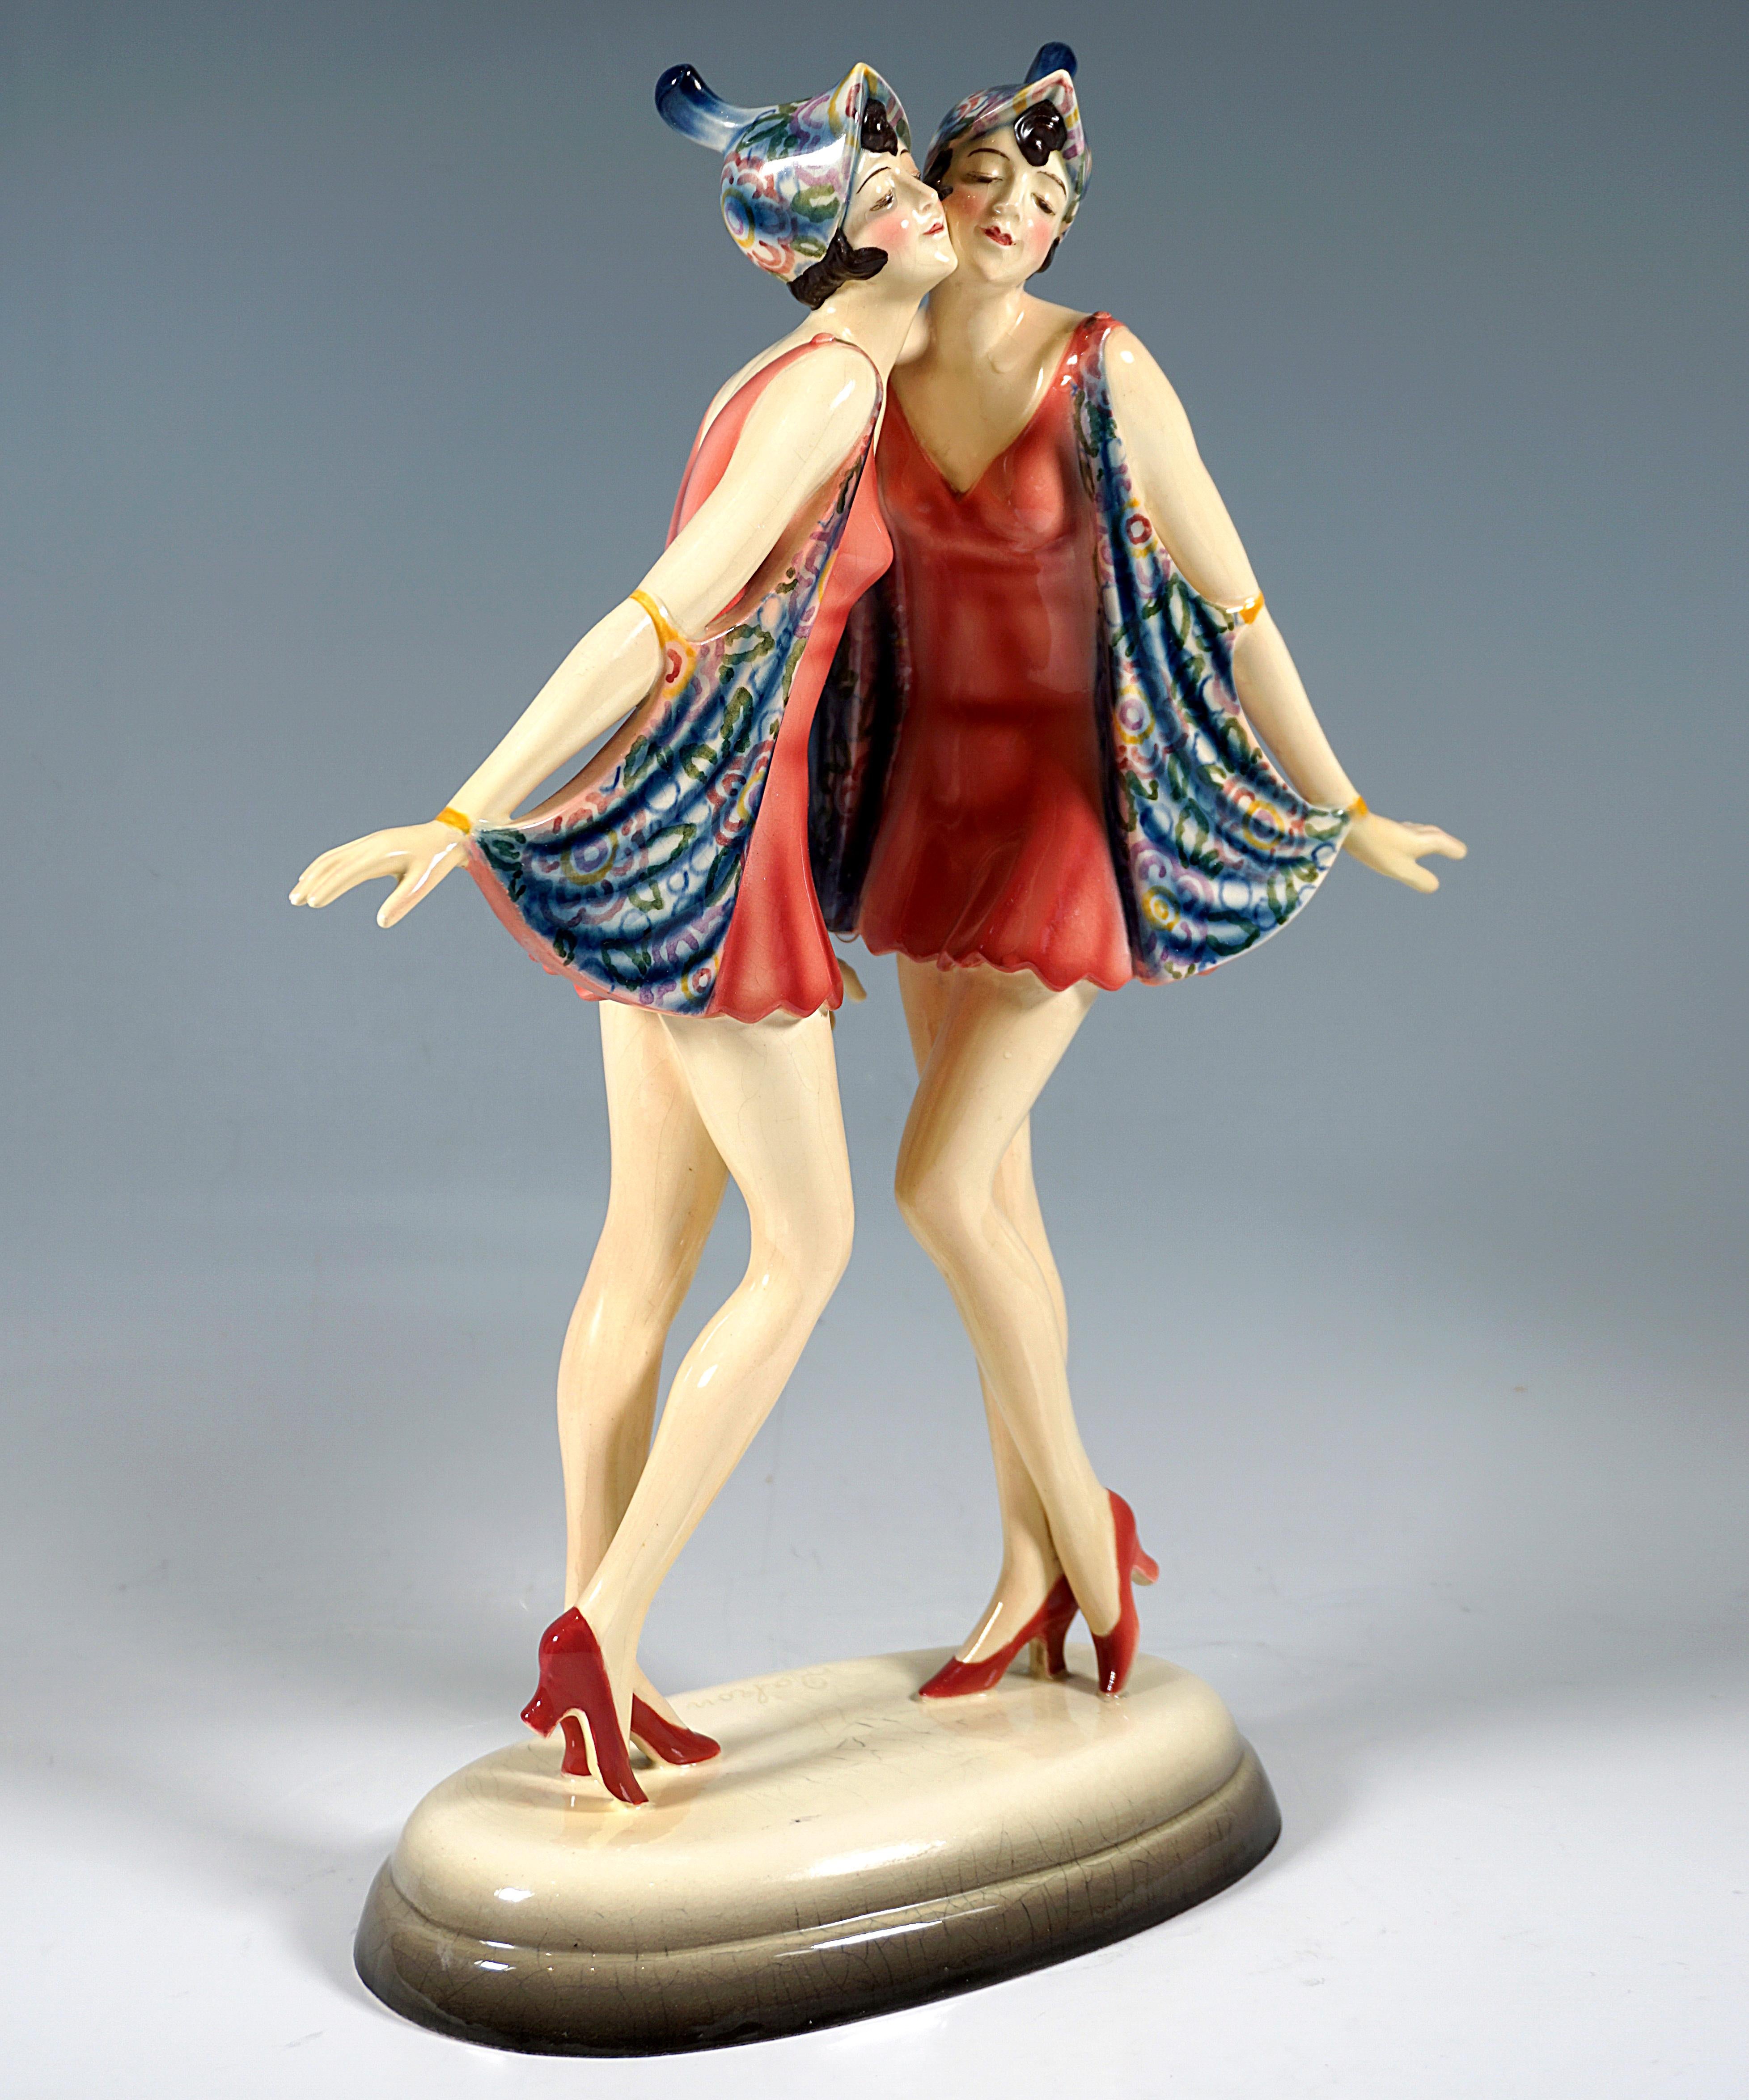 Very Rare Viennese Ceramic Group Of Figures from the 1920s:
The Dolly twins as graceful dancers, posing cheek to cheek with eyes closed, lifting the arms fastened wings of their short dresses, short dark hair covered by matching headdress.
On a